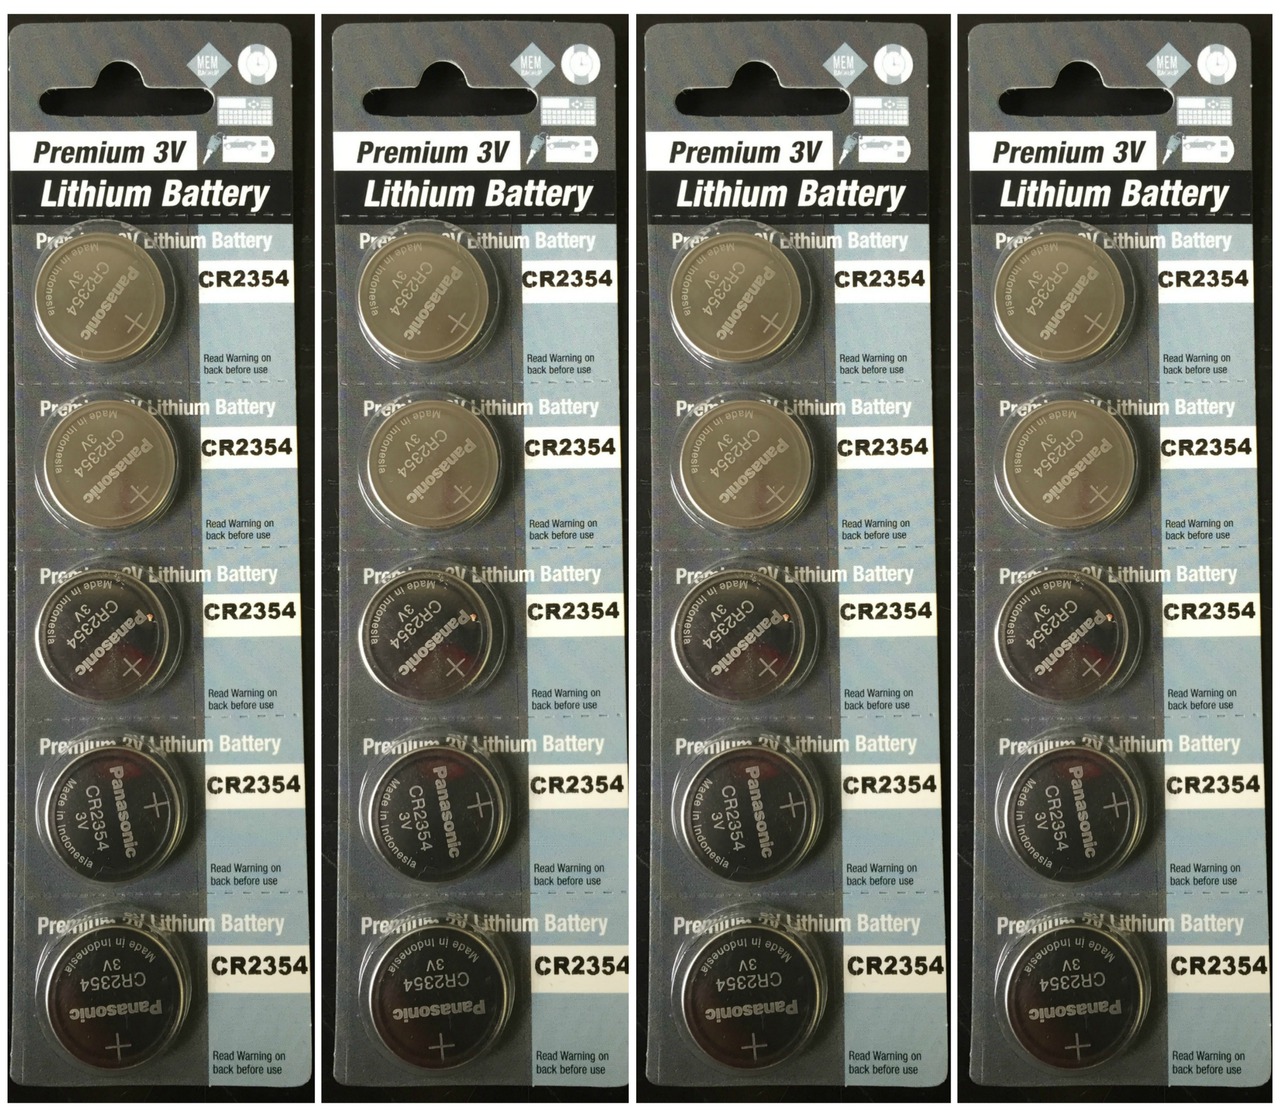 Panasonic CR2354 3V Lithium Coin Battery - 20 Pack +FREE SHIPPING!